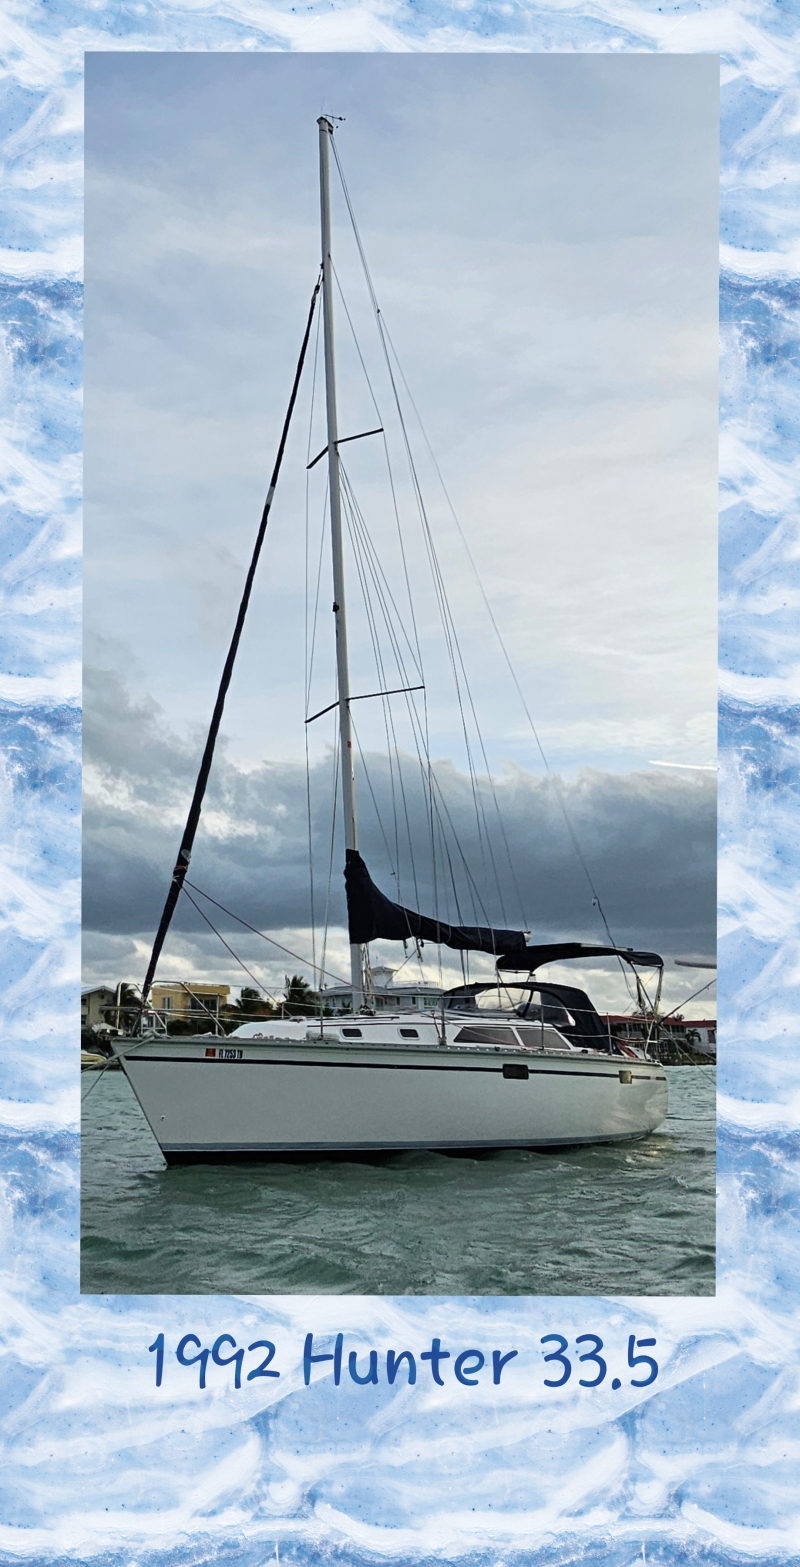 1992 Hunter 33.5 Sailboat for sale in Conch Key, FL - image 2 